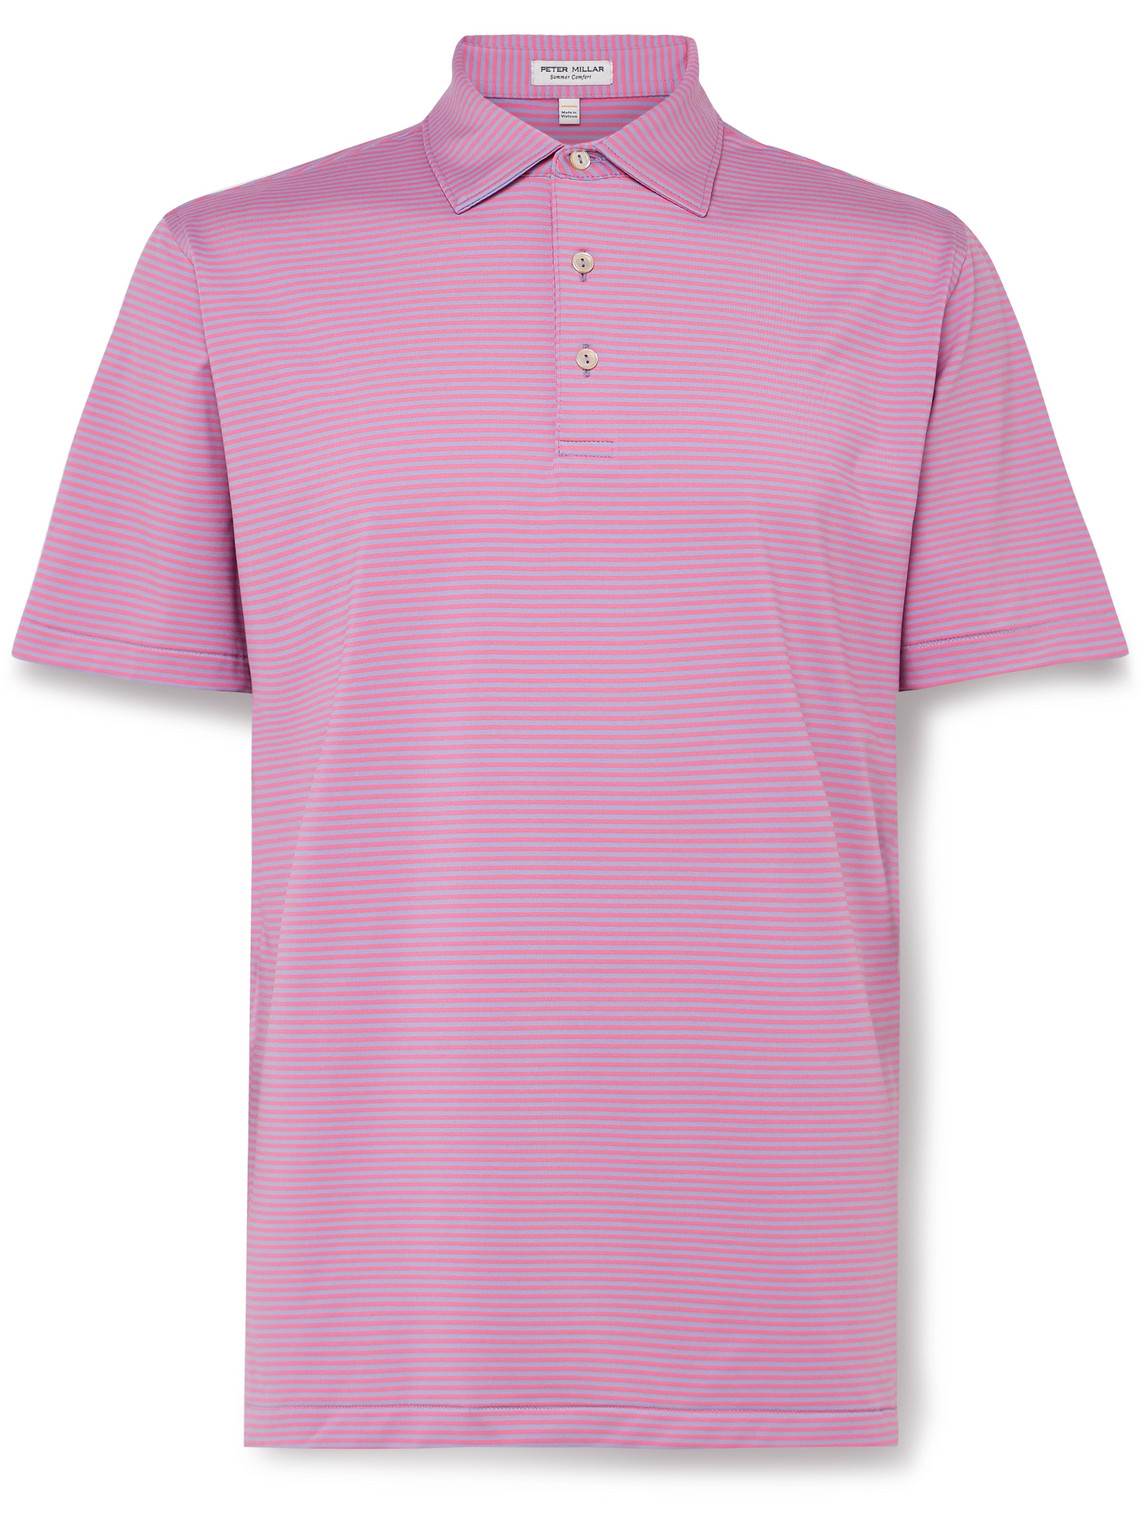 Peter Millar Hales Performance Striped Tech-jersey Golf Polo Shirt In Pink